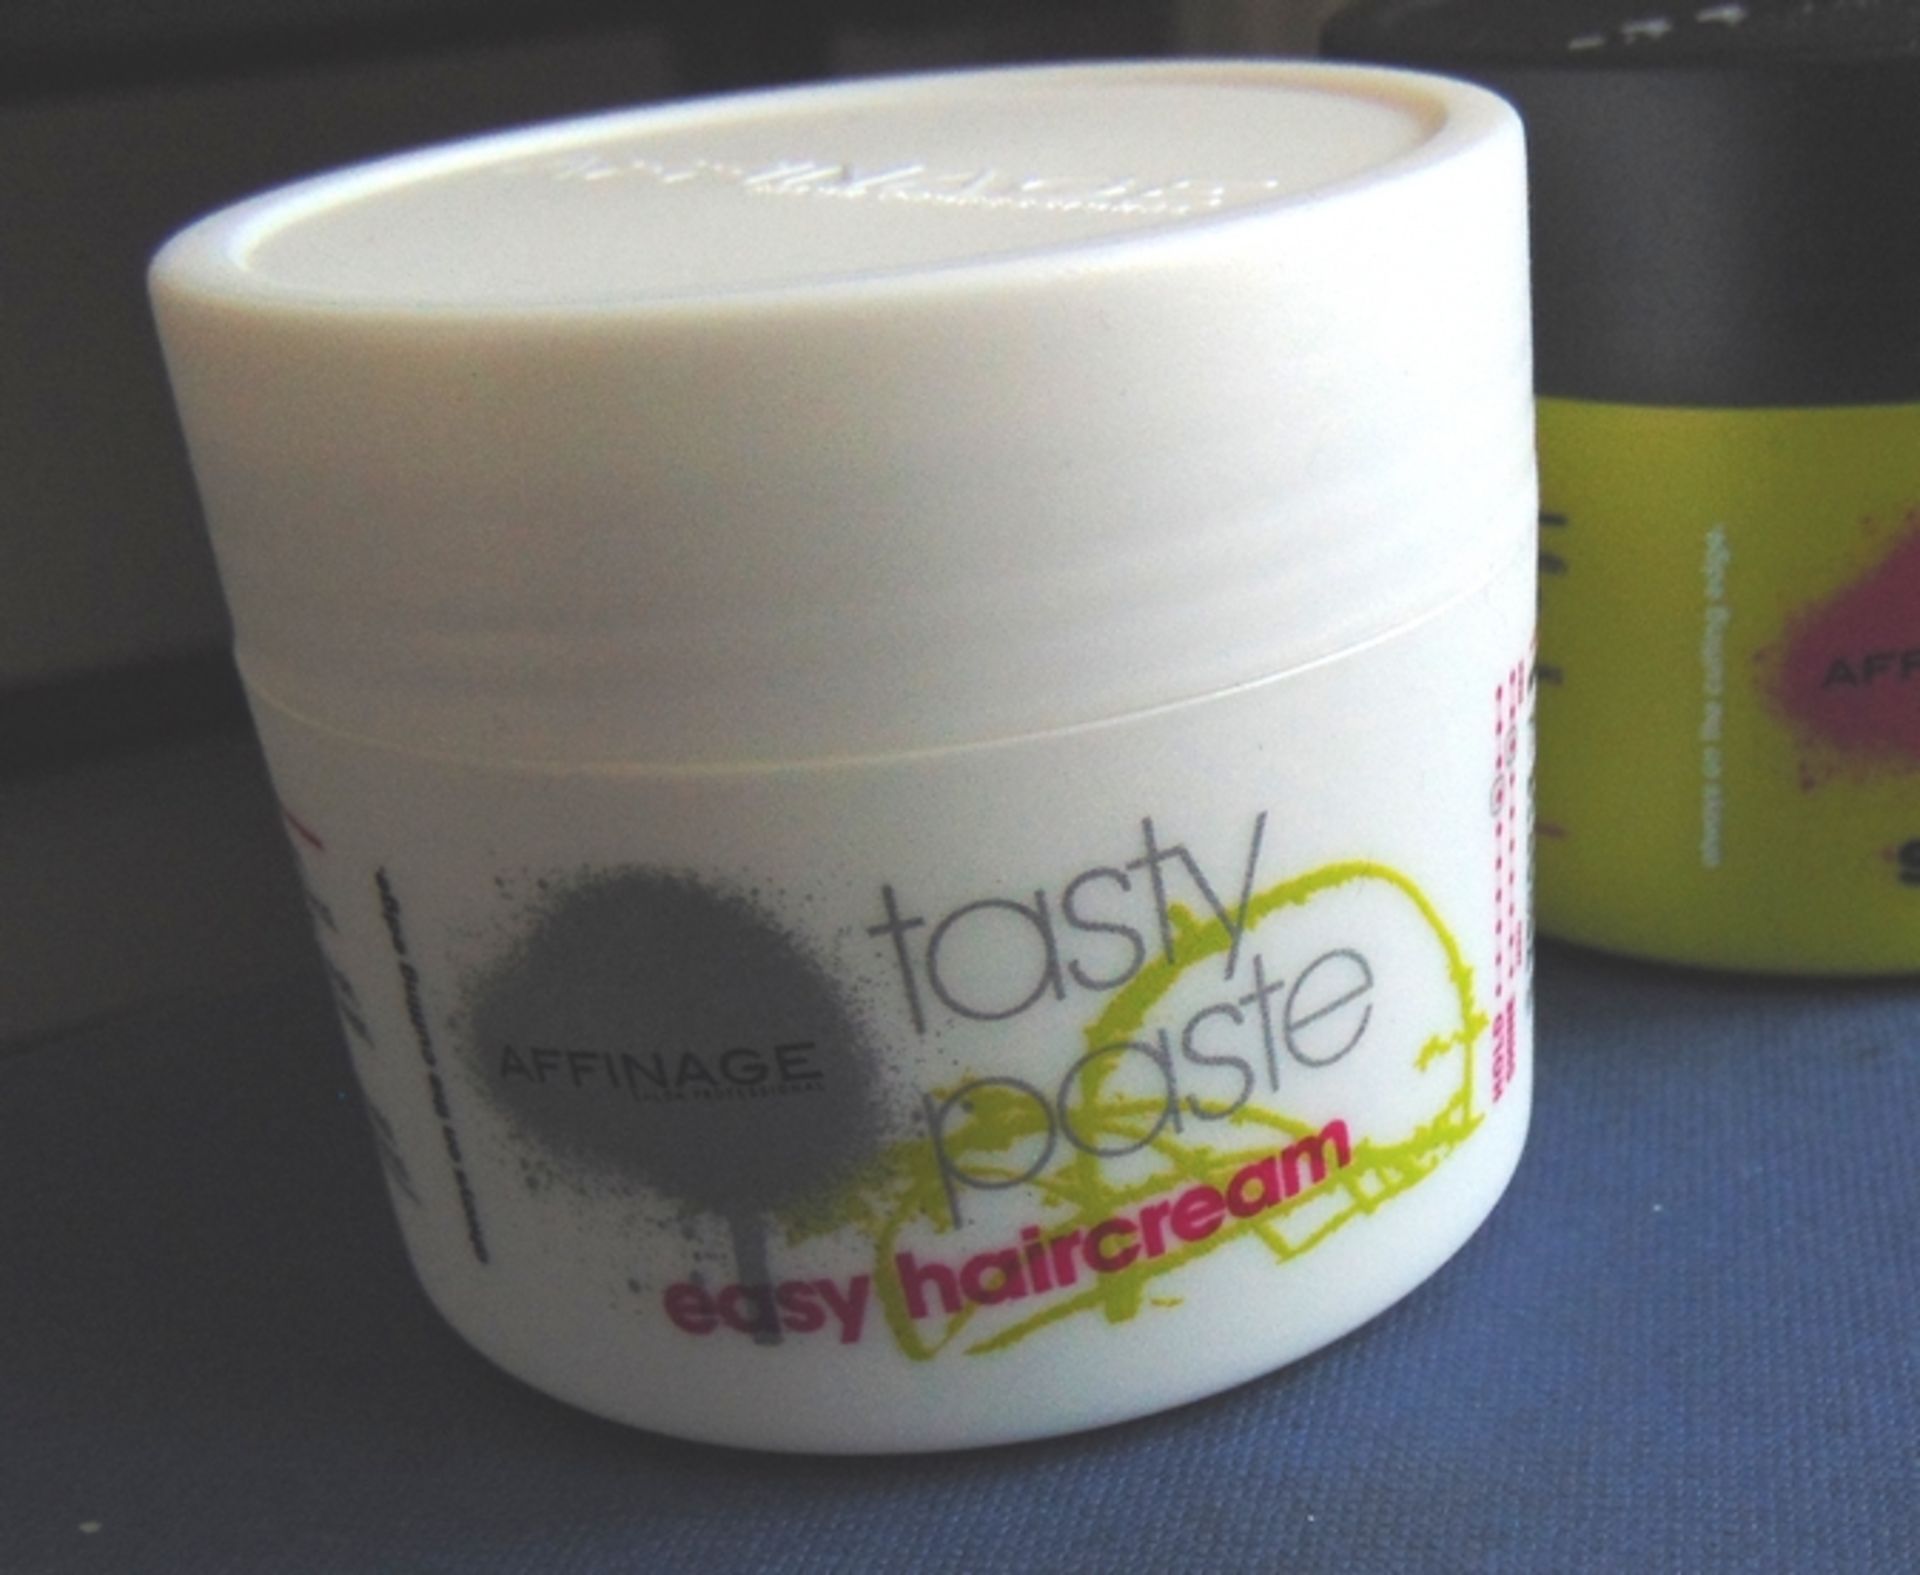 36 mixed hair creams,12 x affinage shamrock styling hairpaste, 12 x - Image 3 of 4